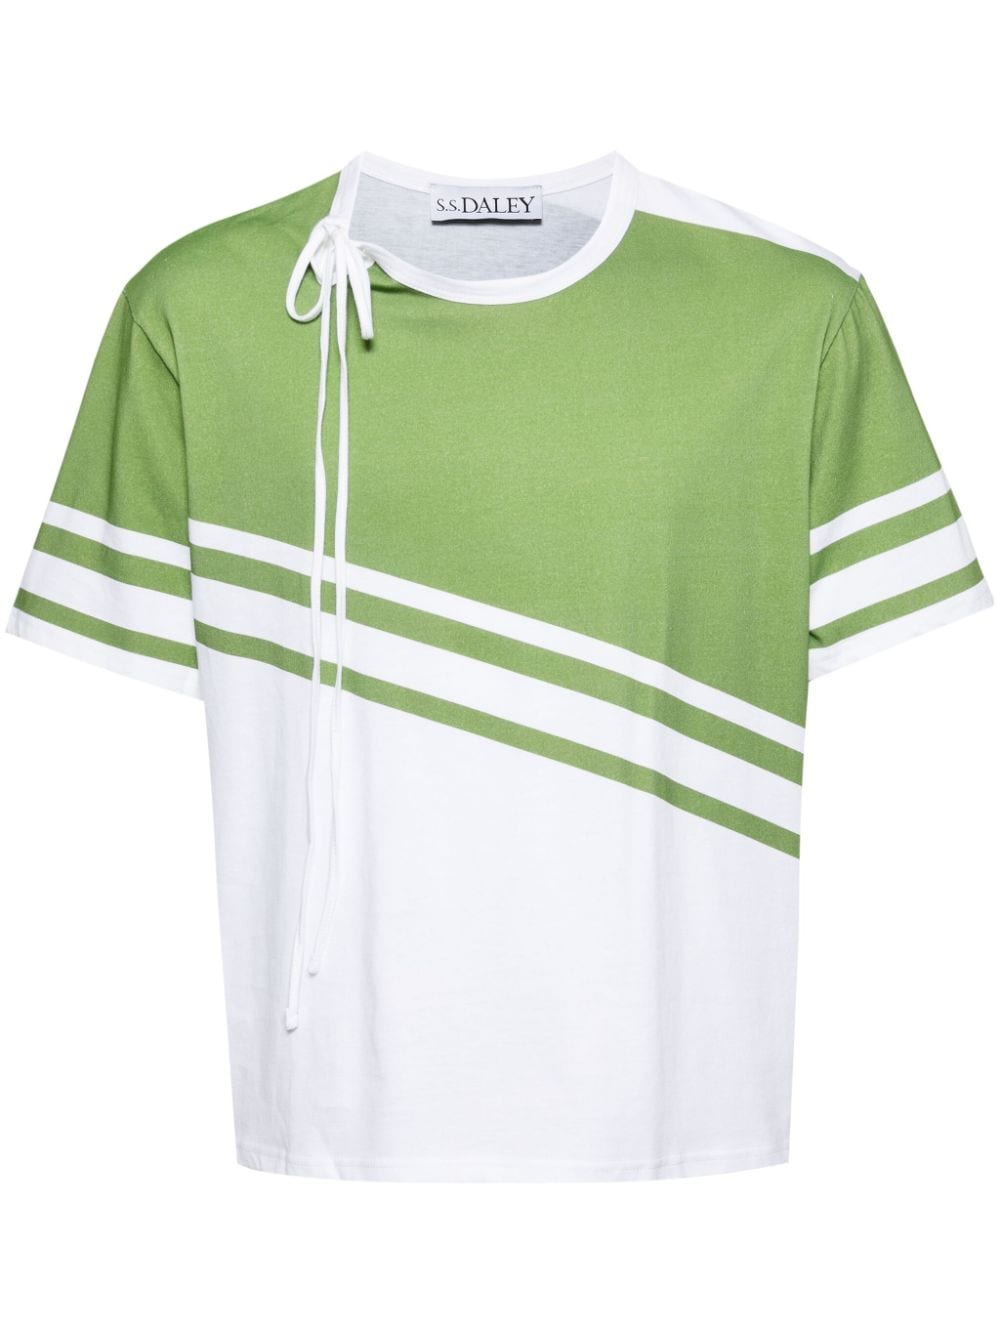 S.S.DALEY striped cotton T-shirt - Green von S.S.DALEY